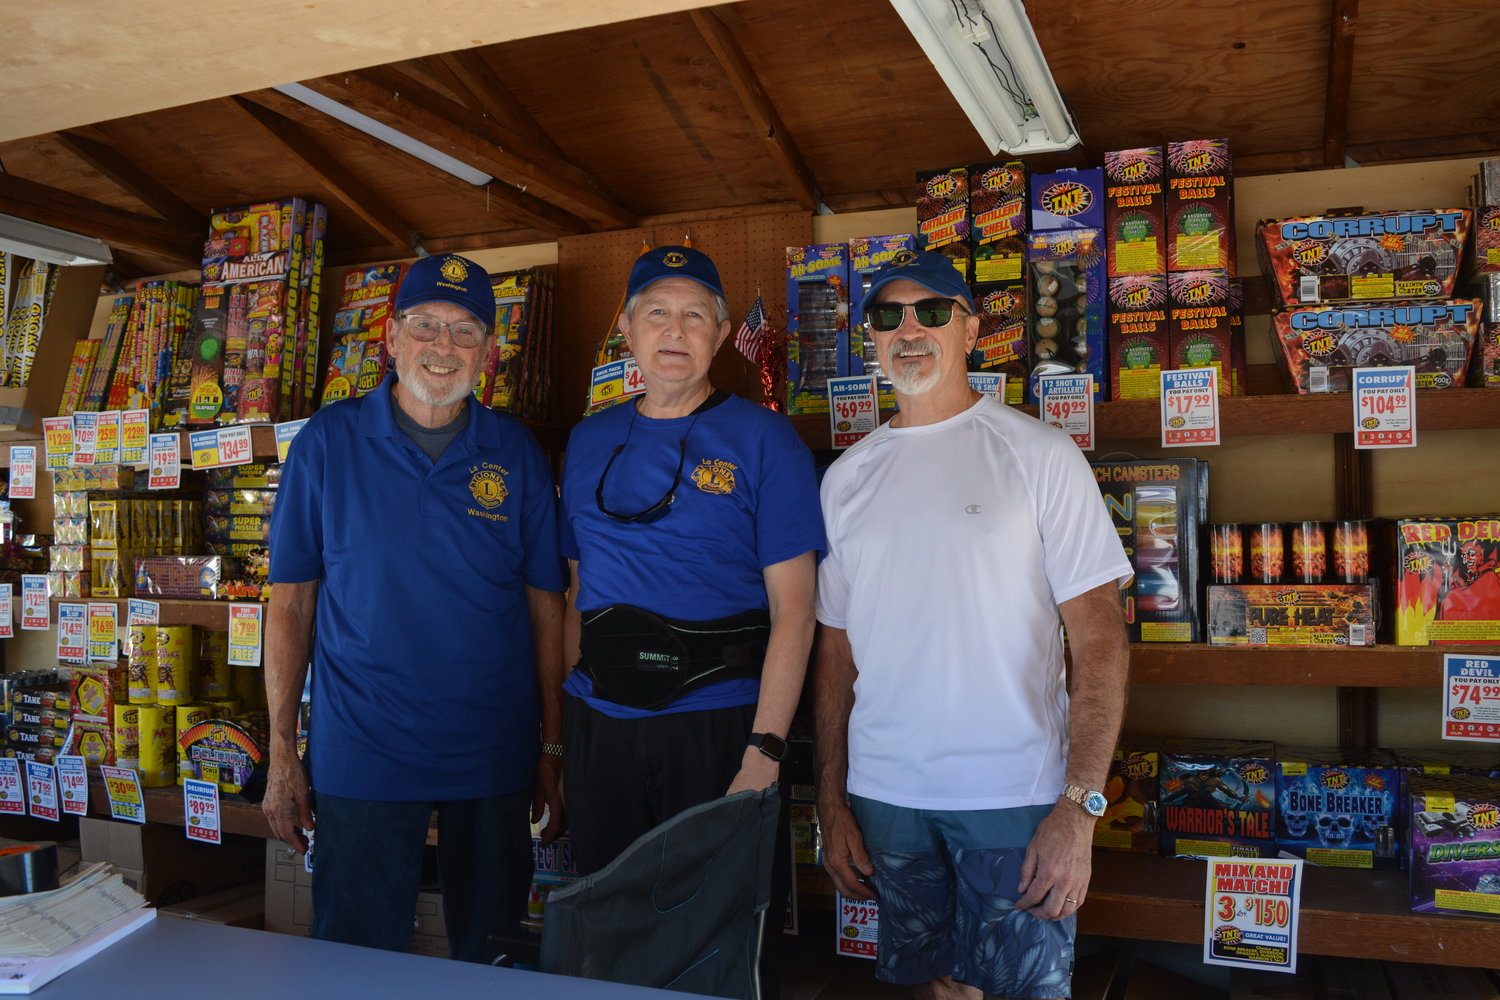 From left to right, Lions Club members Jim Irish, Lance Ebarb and Chris Kroll man their fireworks stand in La Center on June 29.